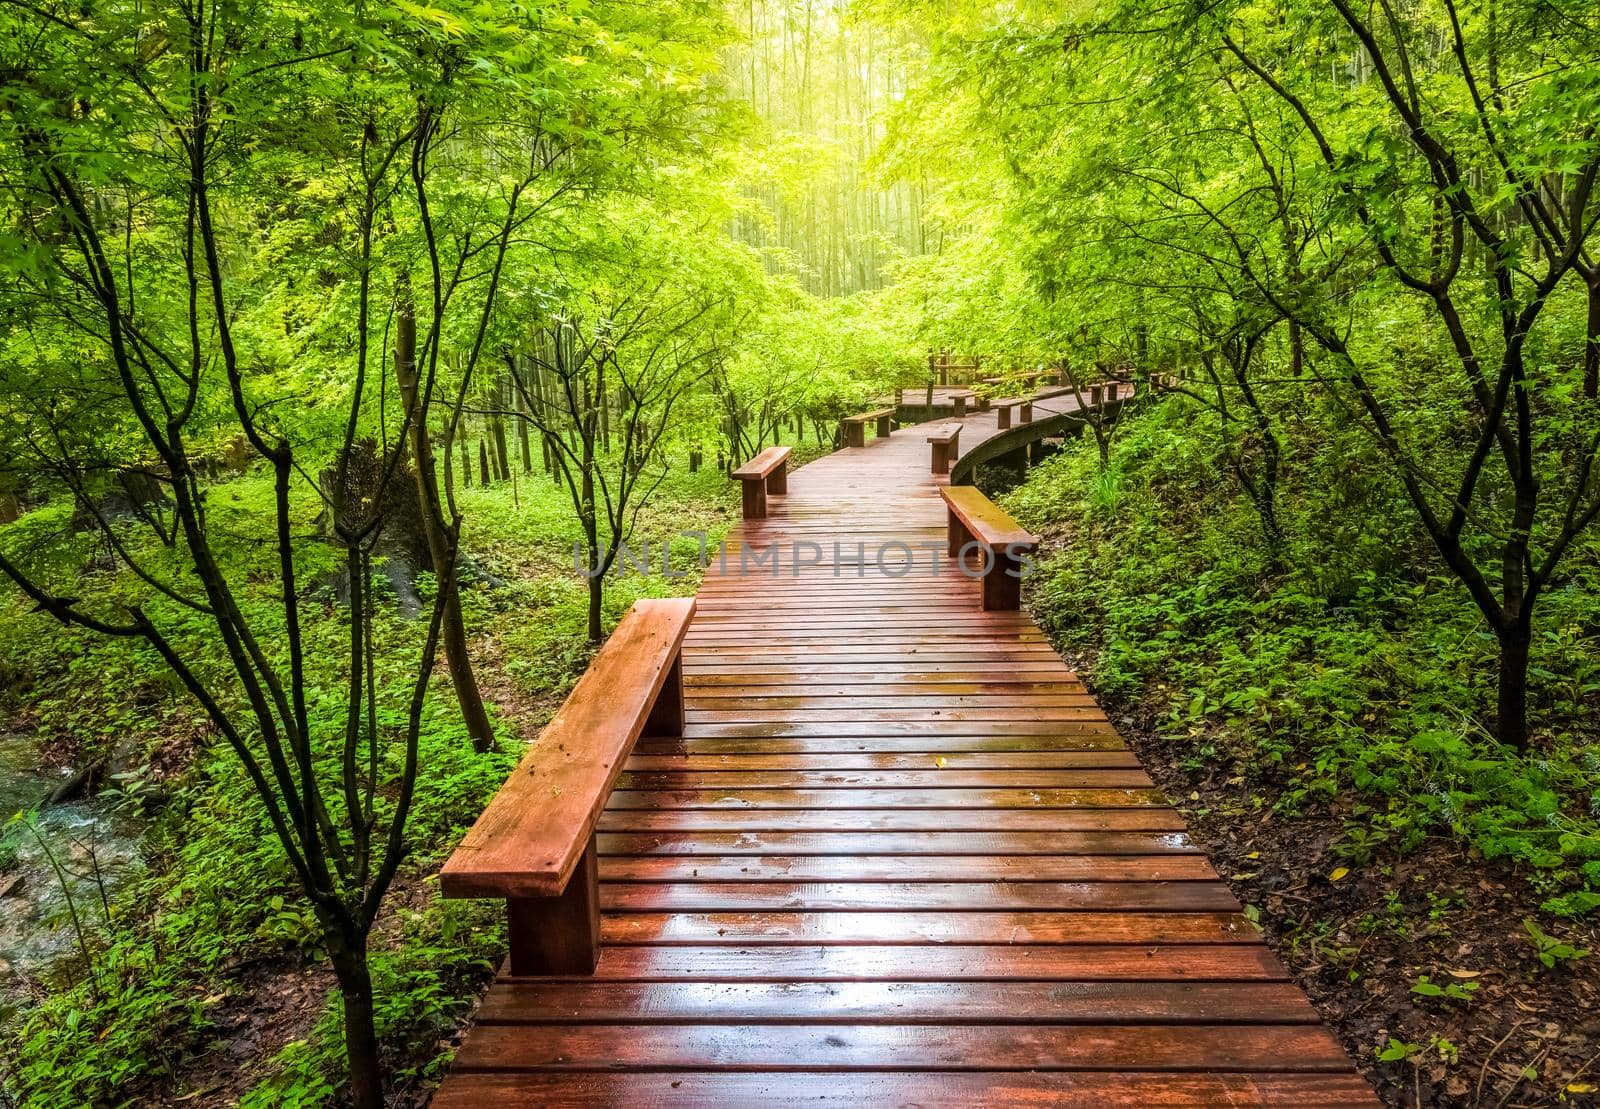 Wooden walkway and green natural scenery in the summer, Boardwalk in the park, Boardwalk in forest